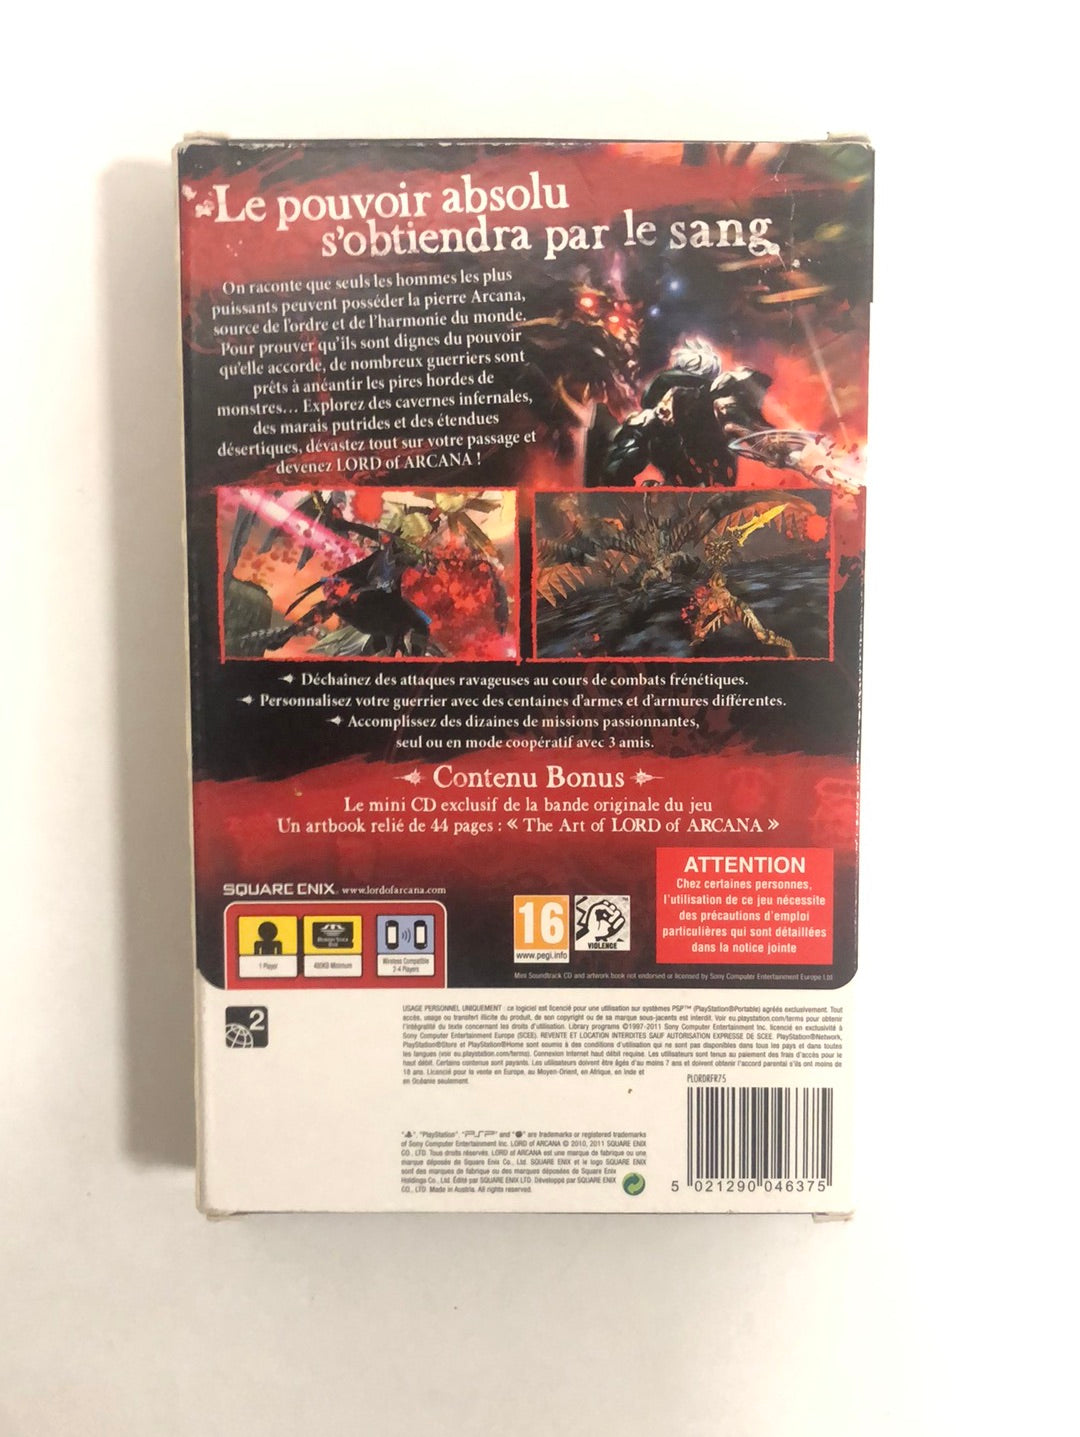 Lord Of Arcana Edition Guilde des Tueurs Sony psp avec notice